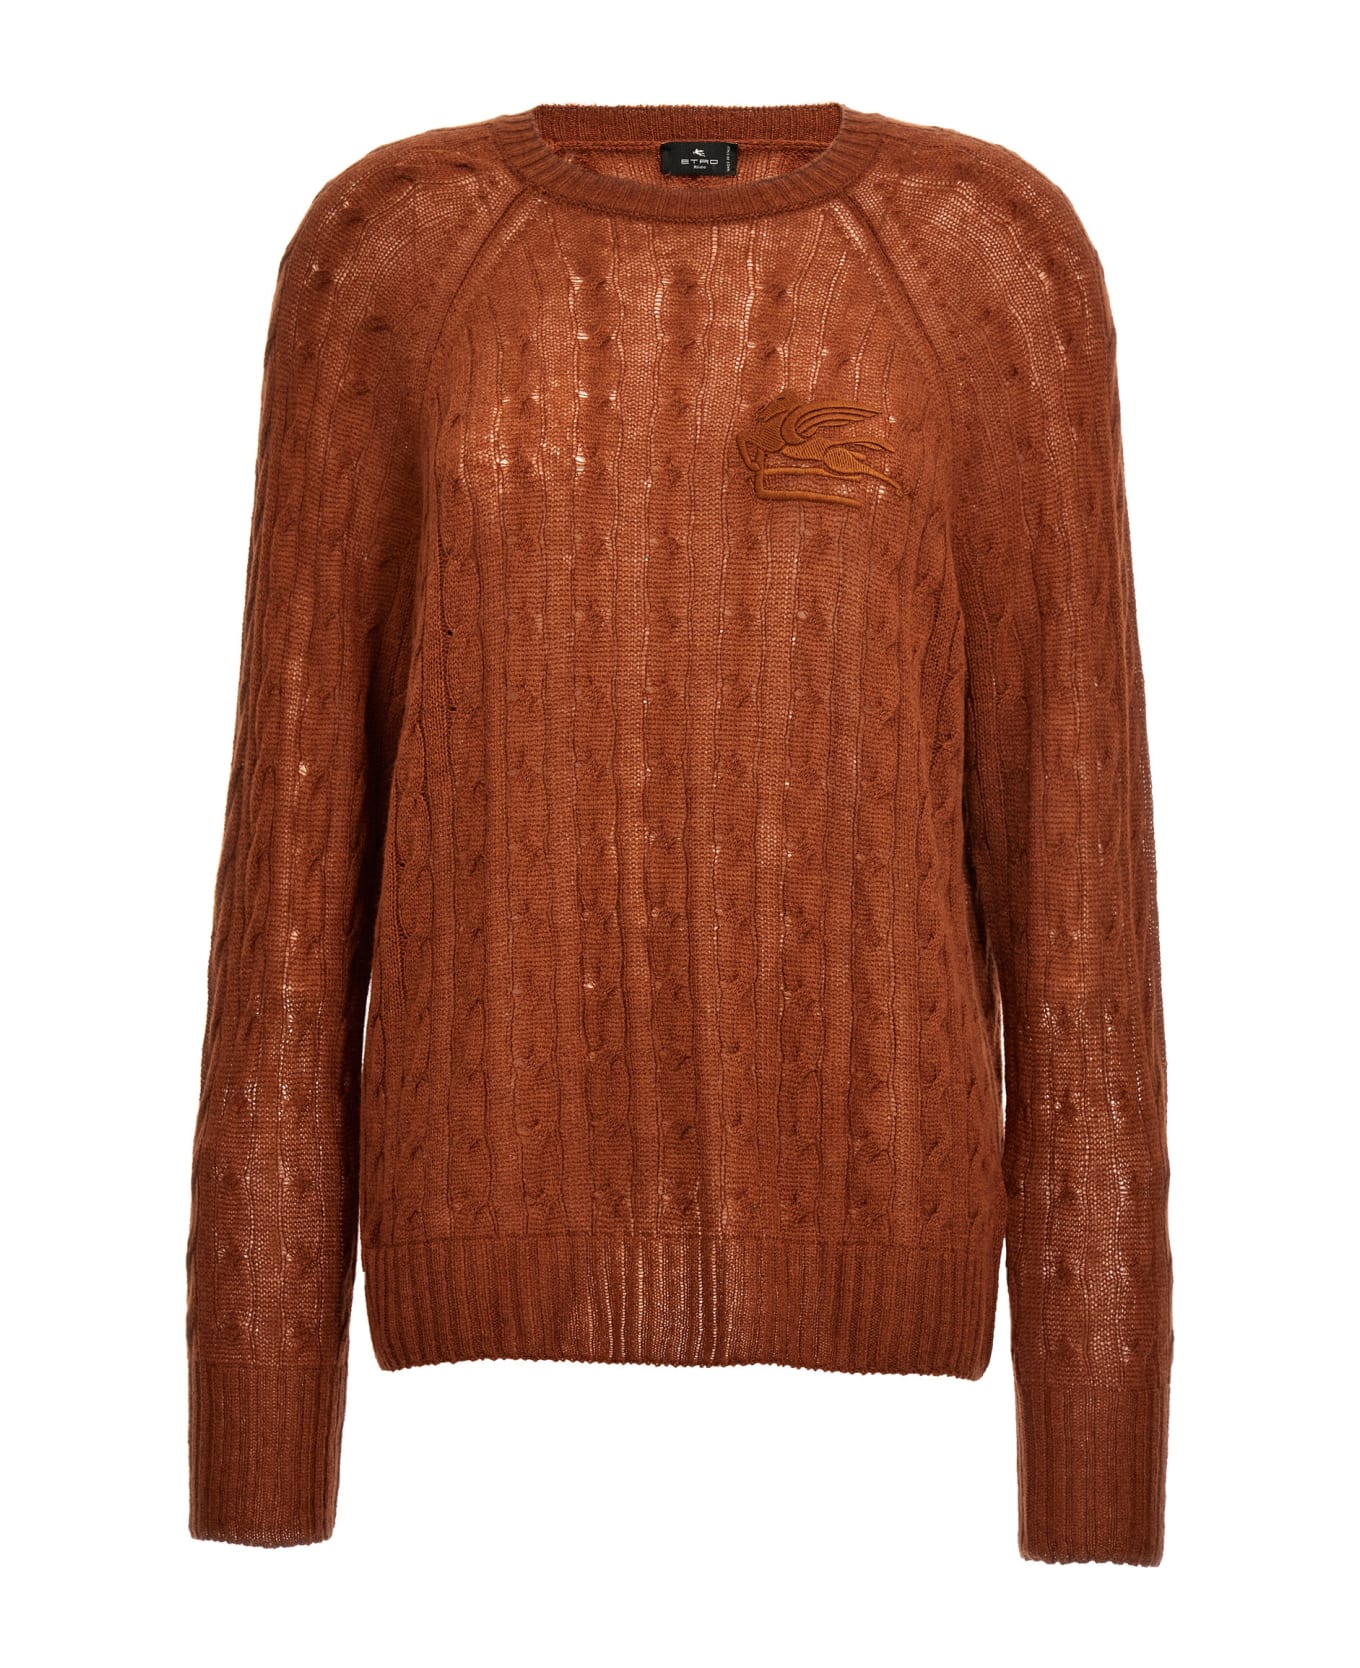 Etro True To Size Fit - Brown